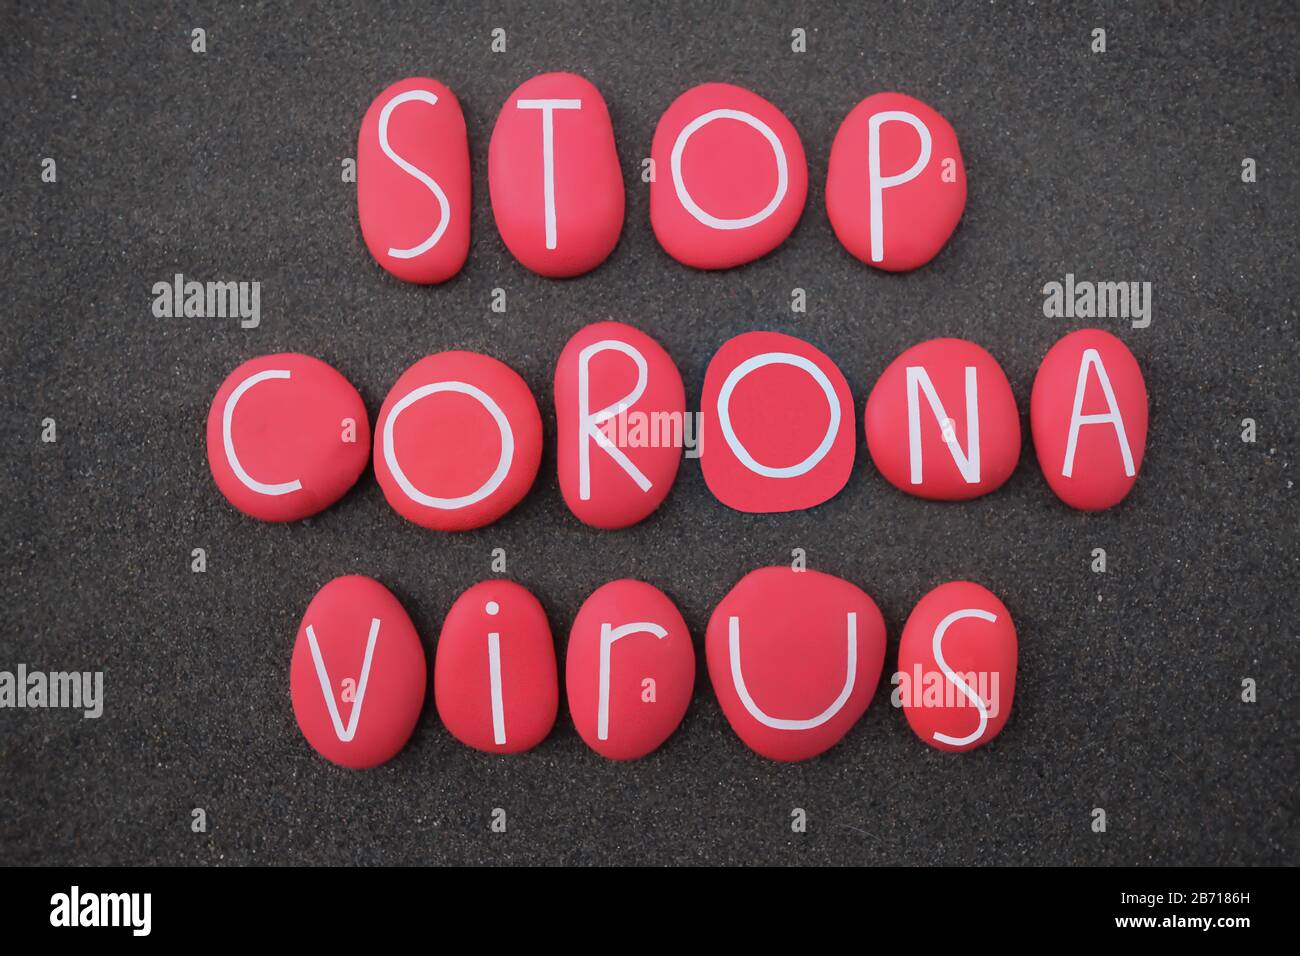 Stop Coronavirus text composed with red colored stone letters over black volcanic sand Stock Photo